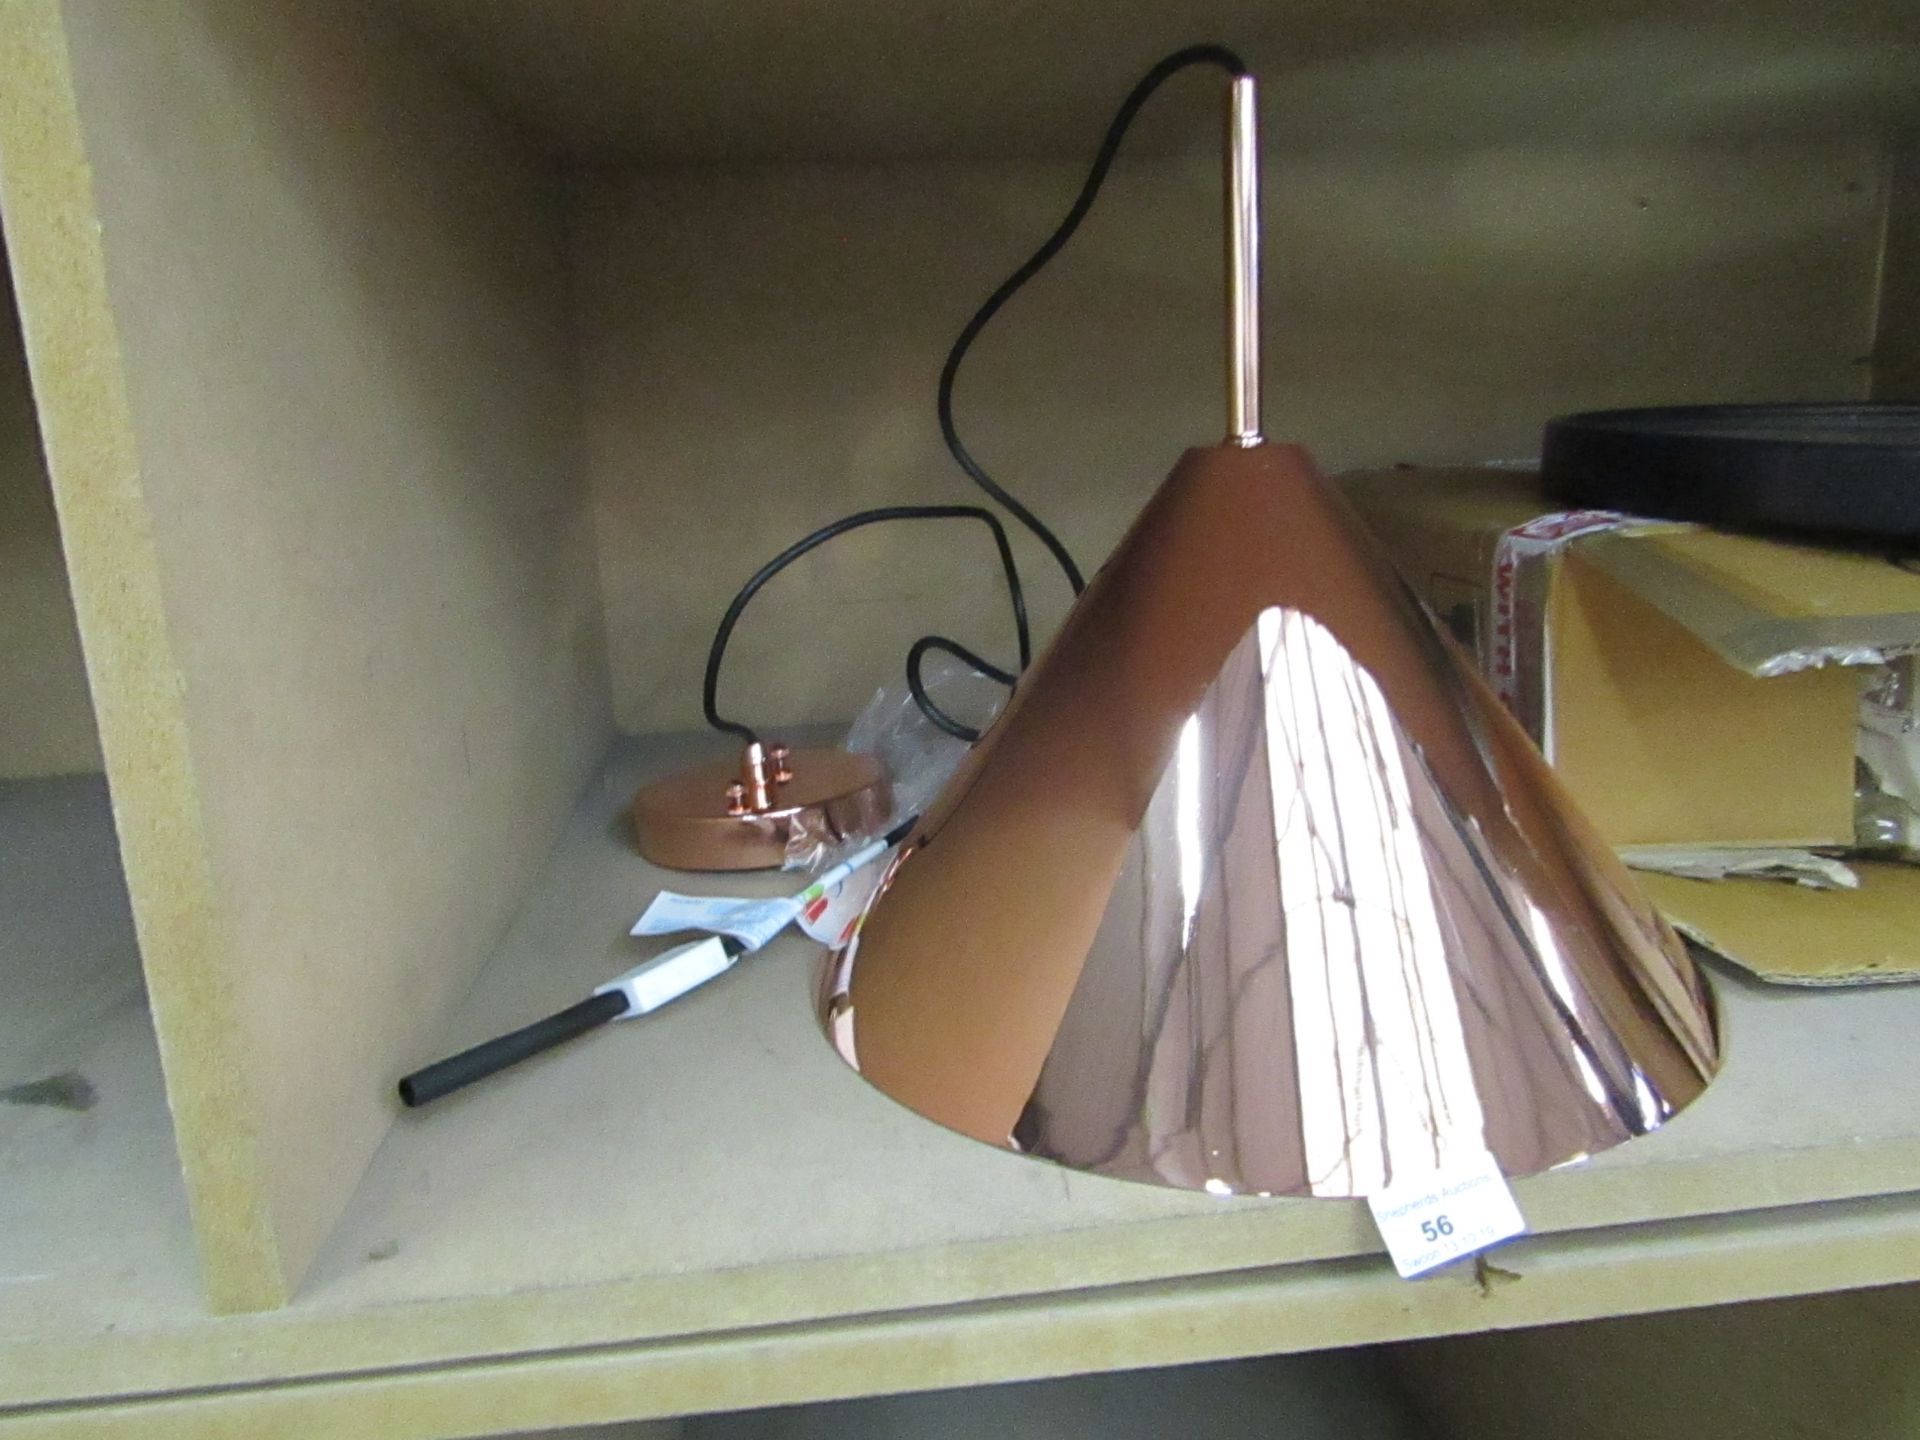 Swoon Joey pendant light in Copper, RRP £79, please read lot 0 before bidding - Image 2 of 2